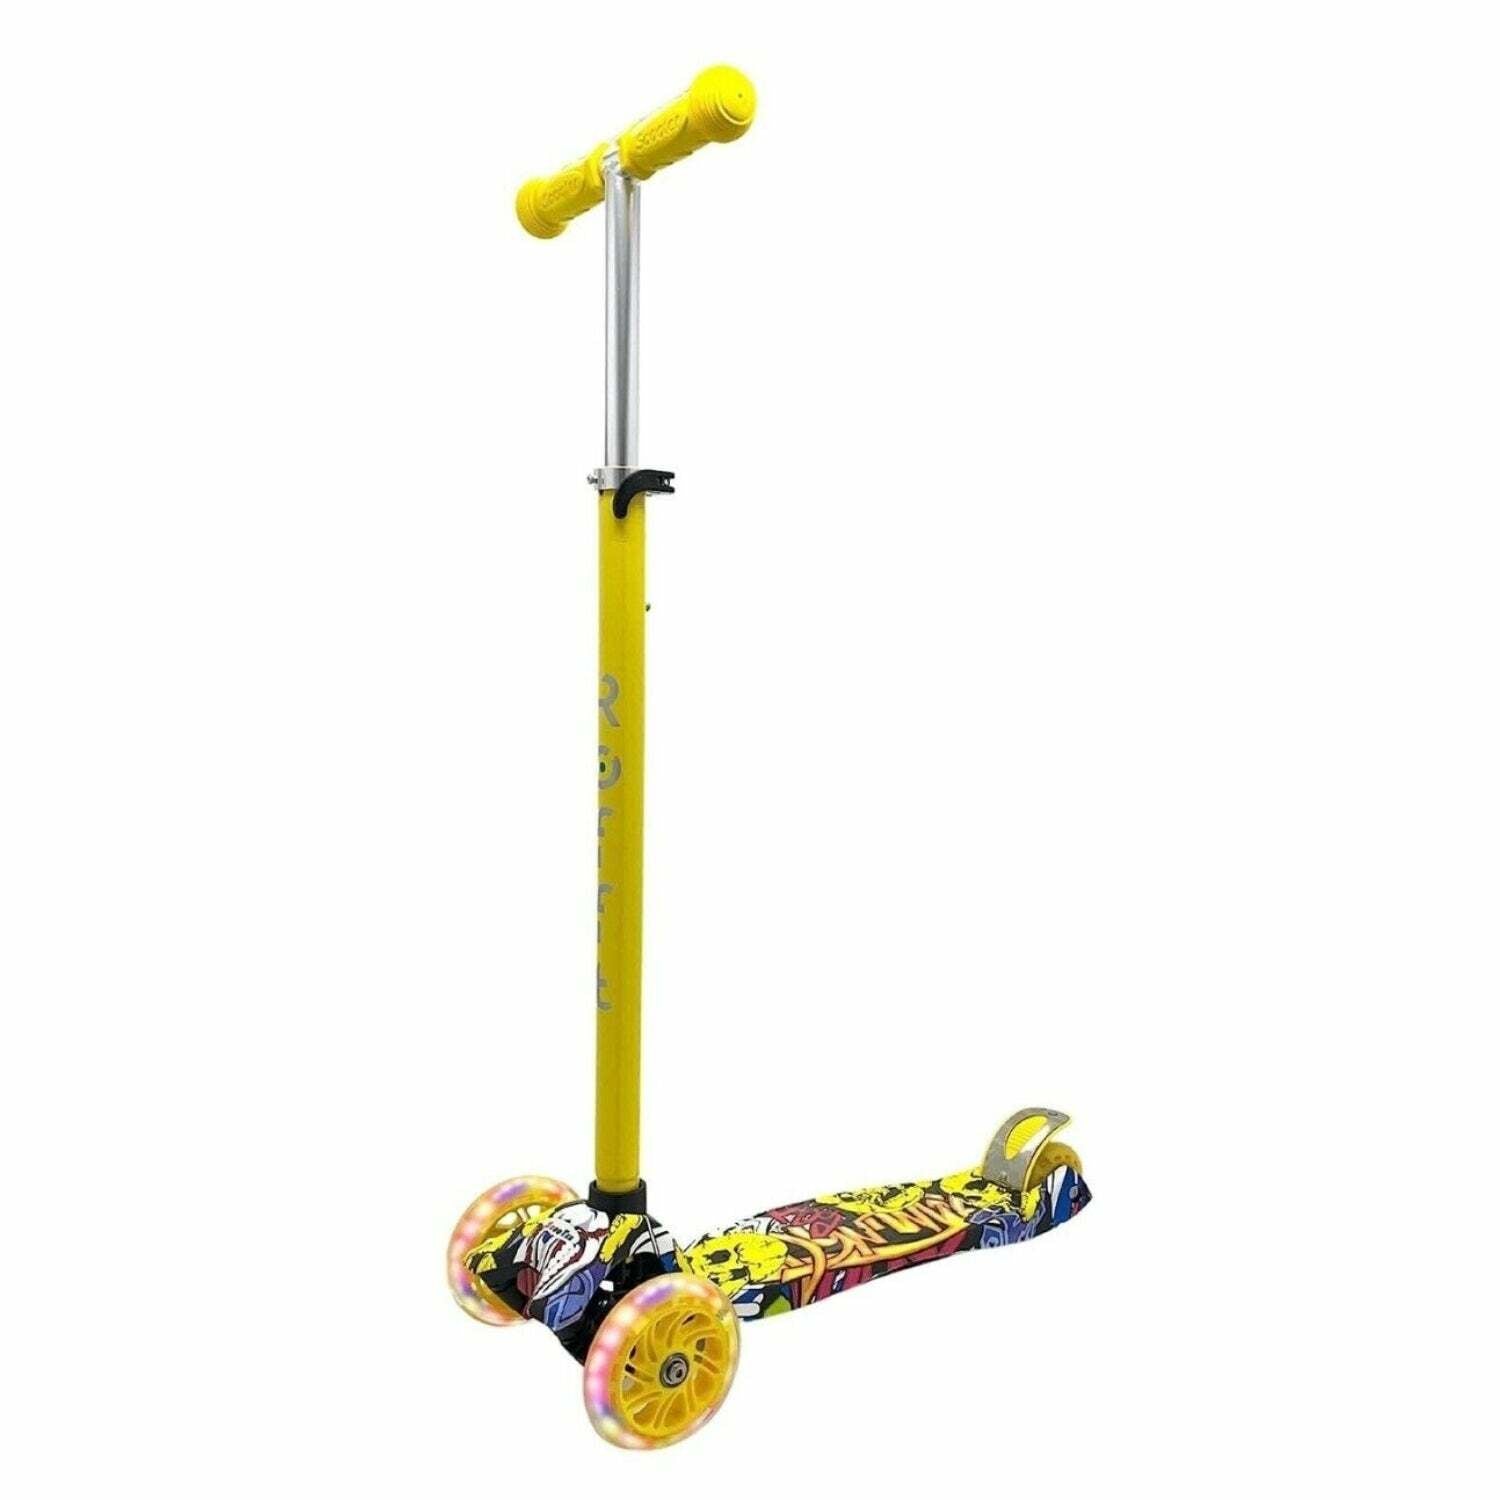 ROFFT - Kick Scooter Maxi, 3 Wheel, Lean-to-Steer, LED, Kids Ages 6-12 Graffiti Yellow